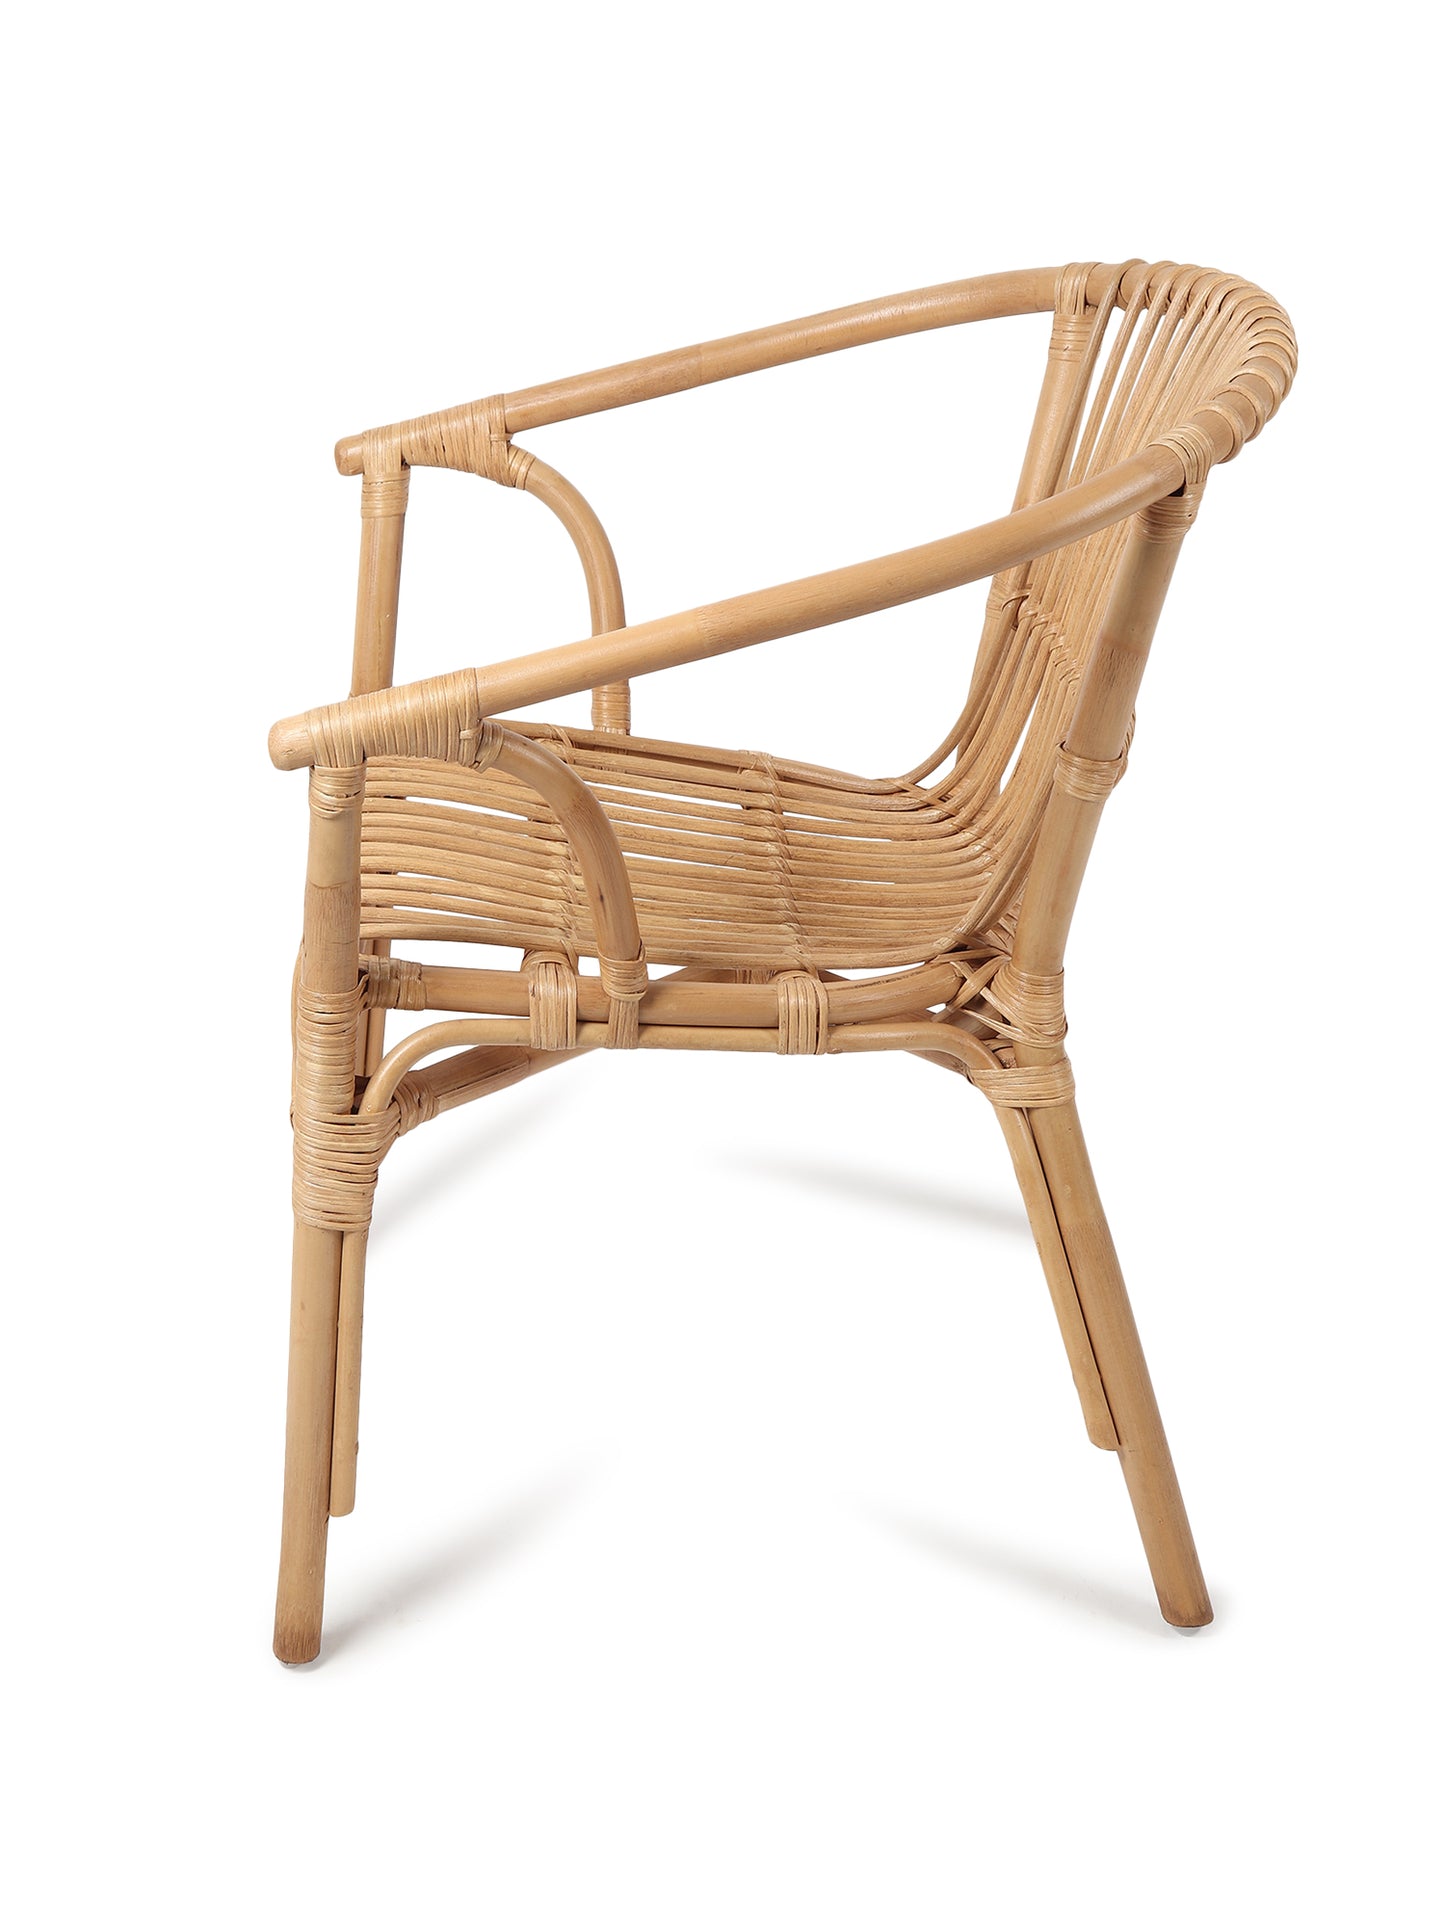 Bamboo Chair & Chair for living room